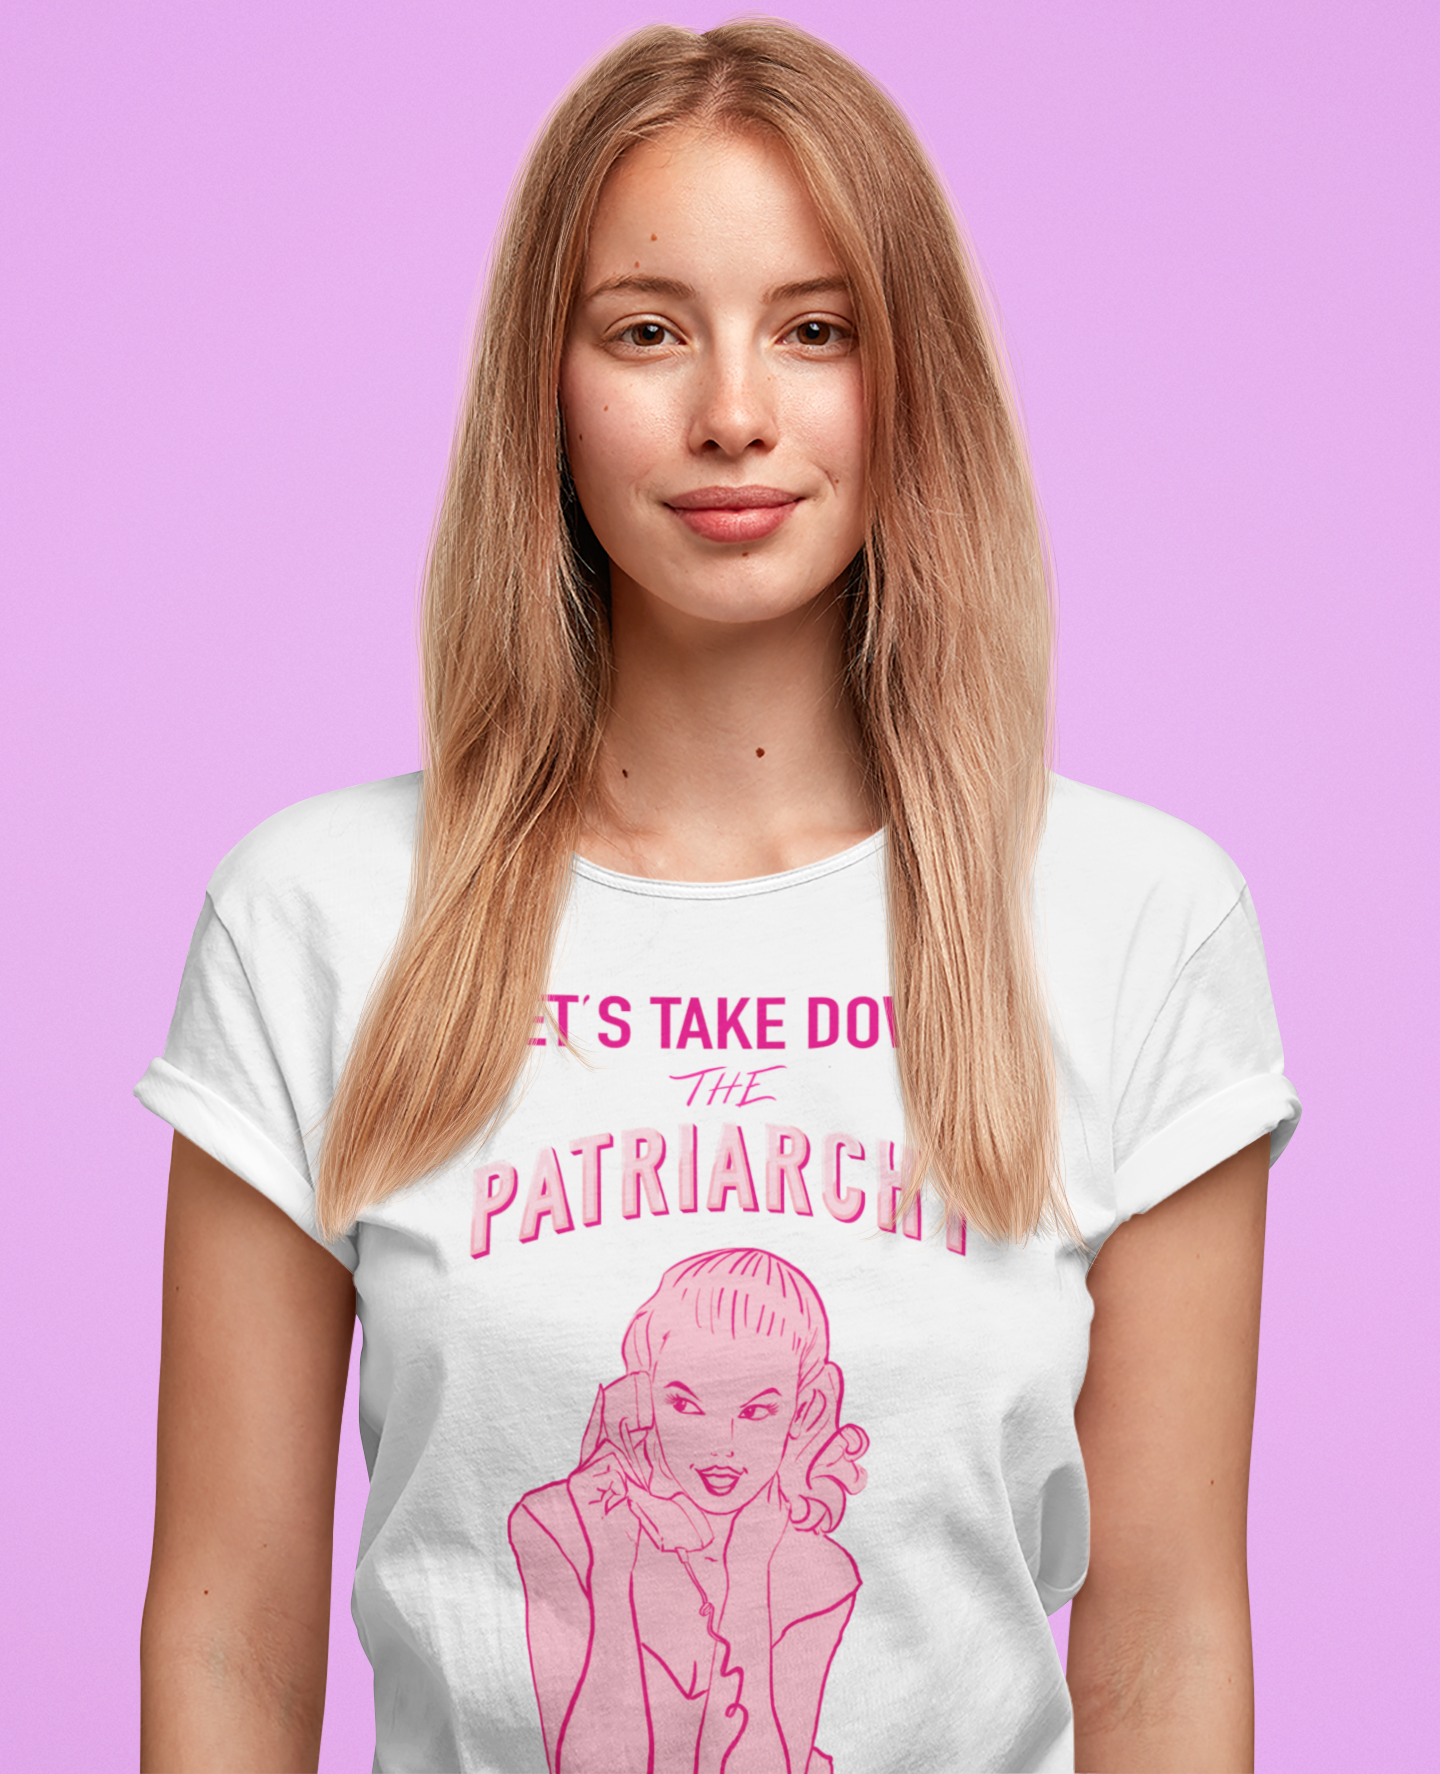 Let's Smash The Patriarchy Fairtrade Organic Cotton Tee in Black or White